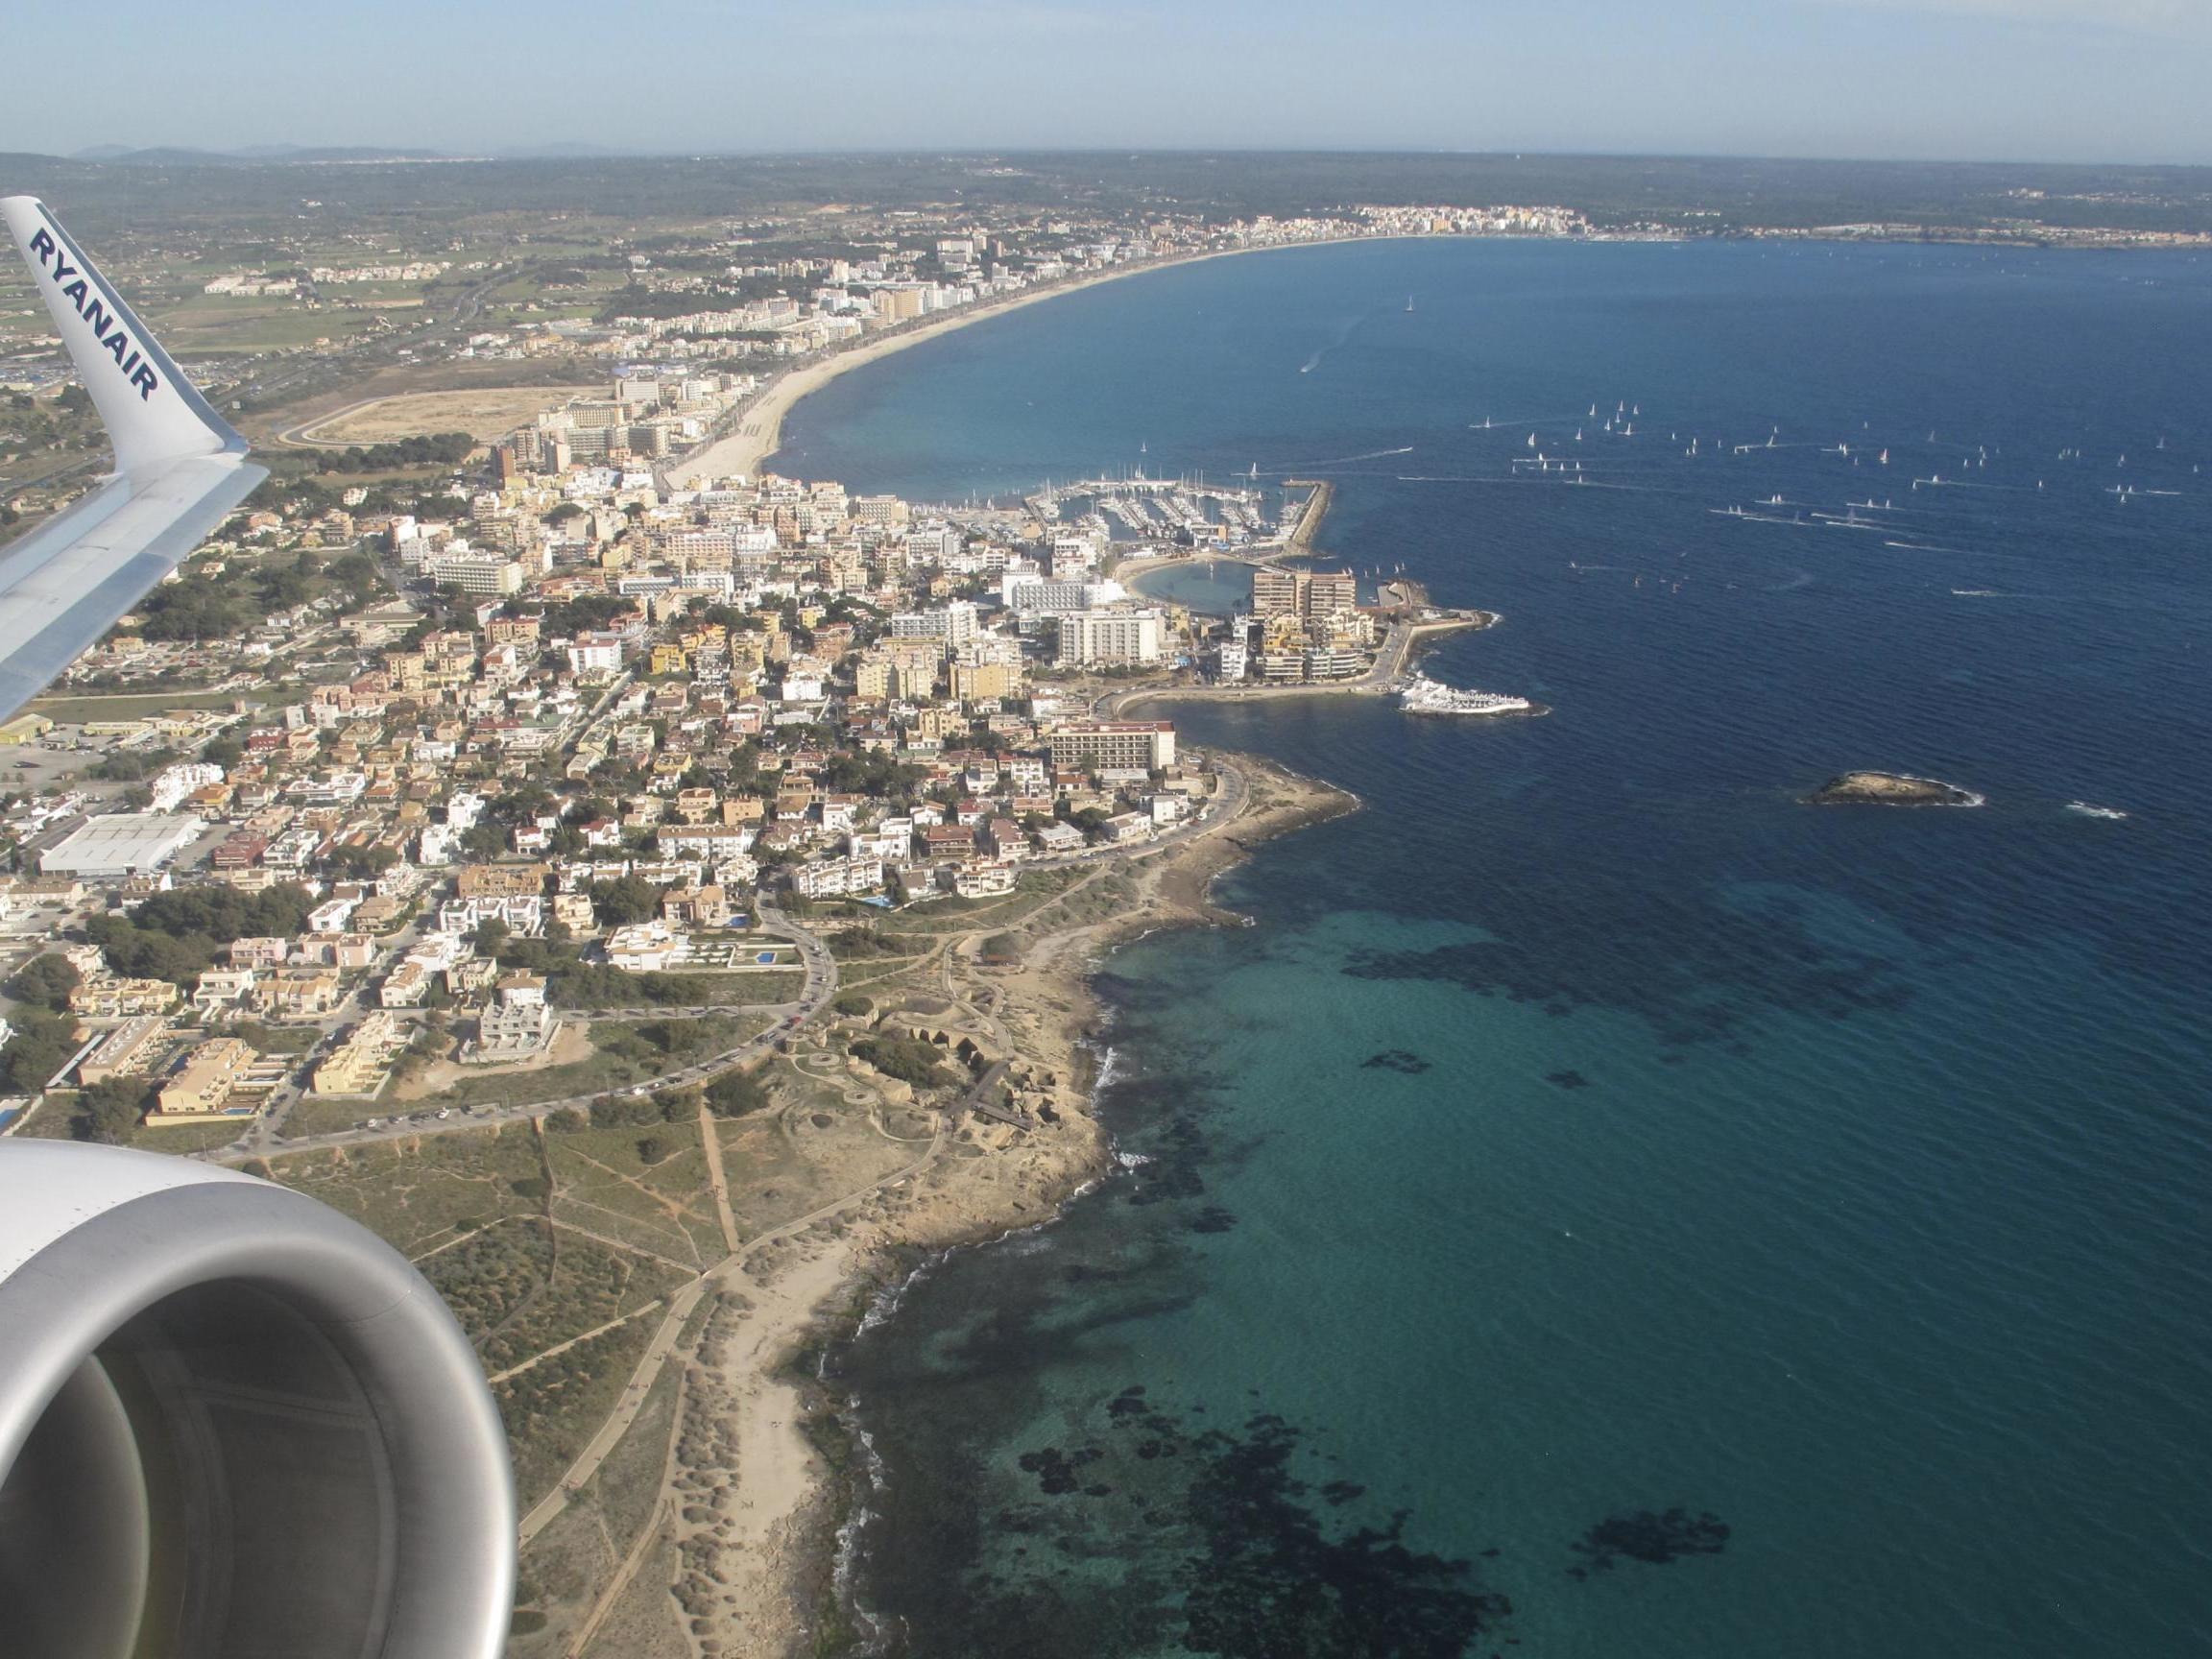 Flying to Mallorca after a no-deal Brexit would be more complicated